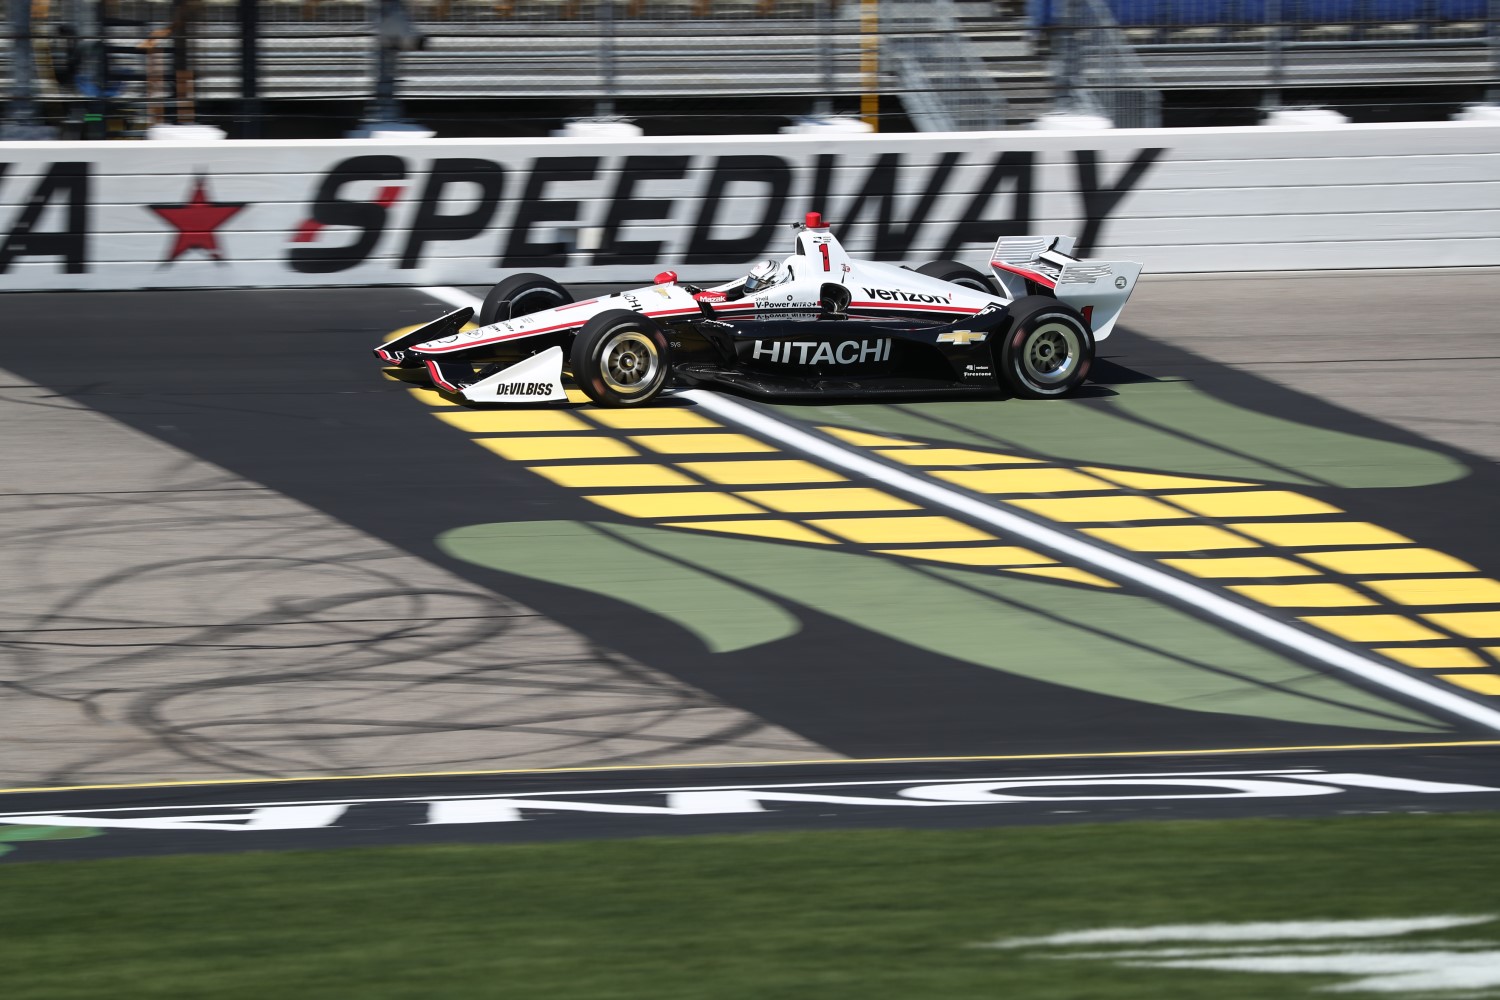 Can Newgarden keep the points lead?